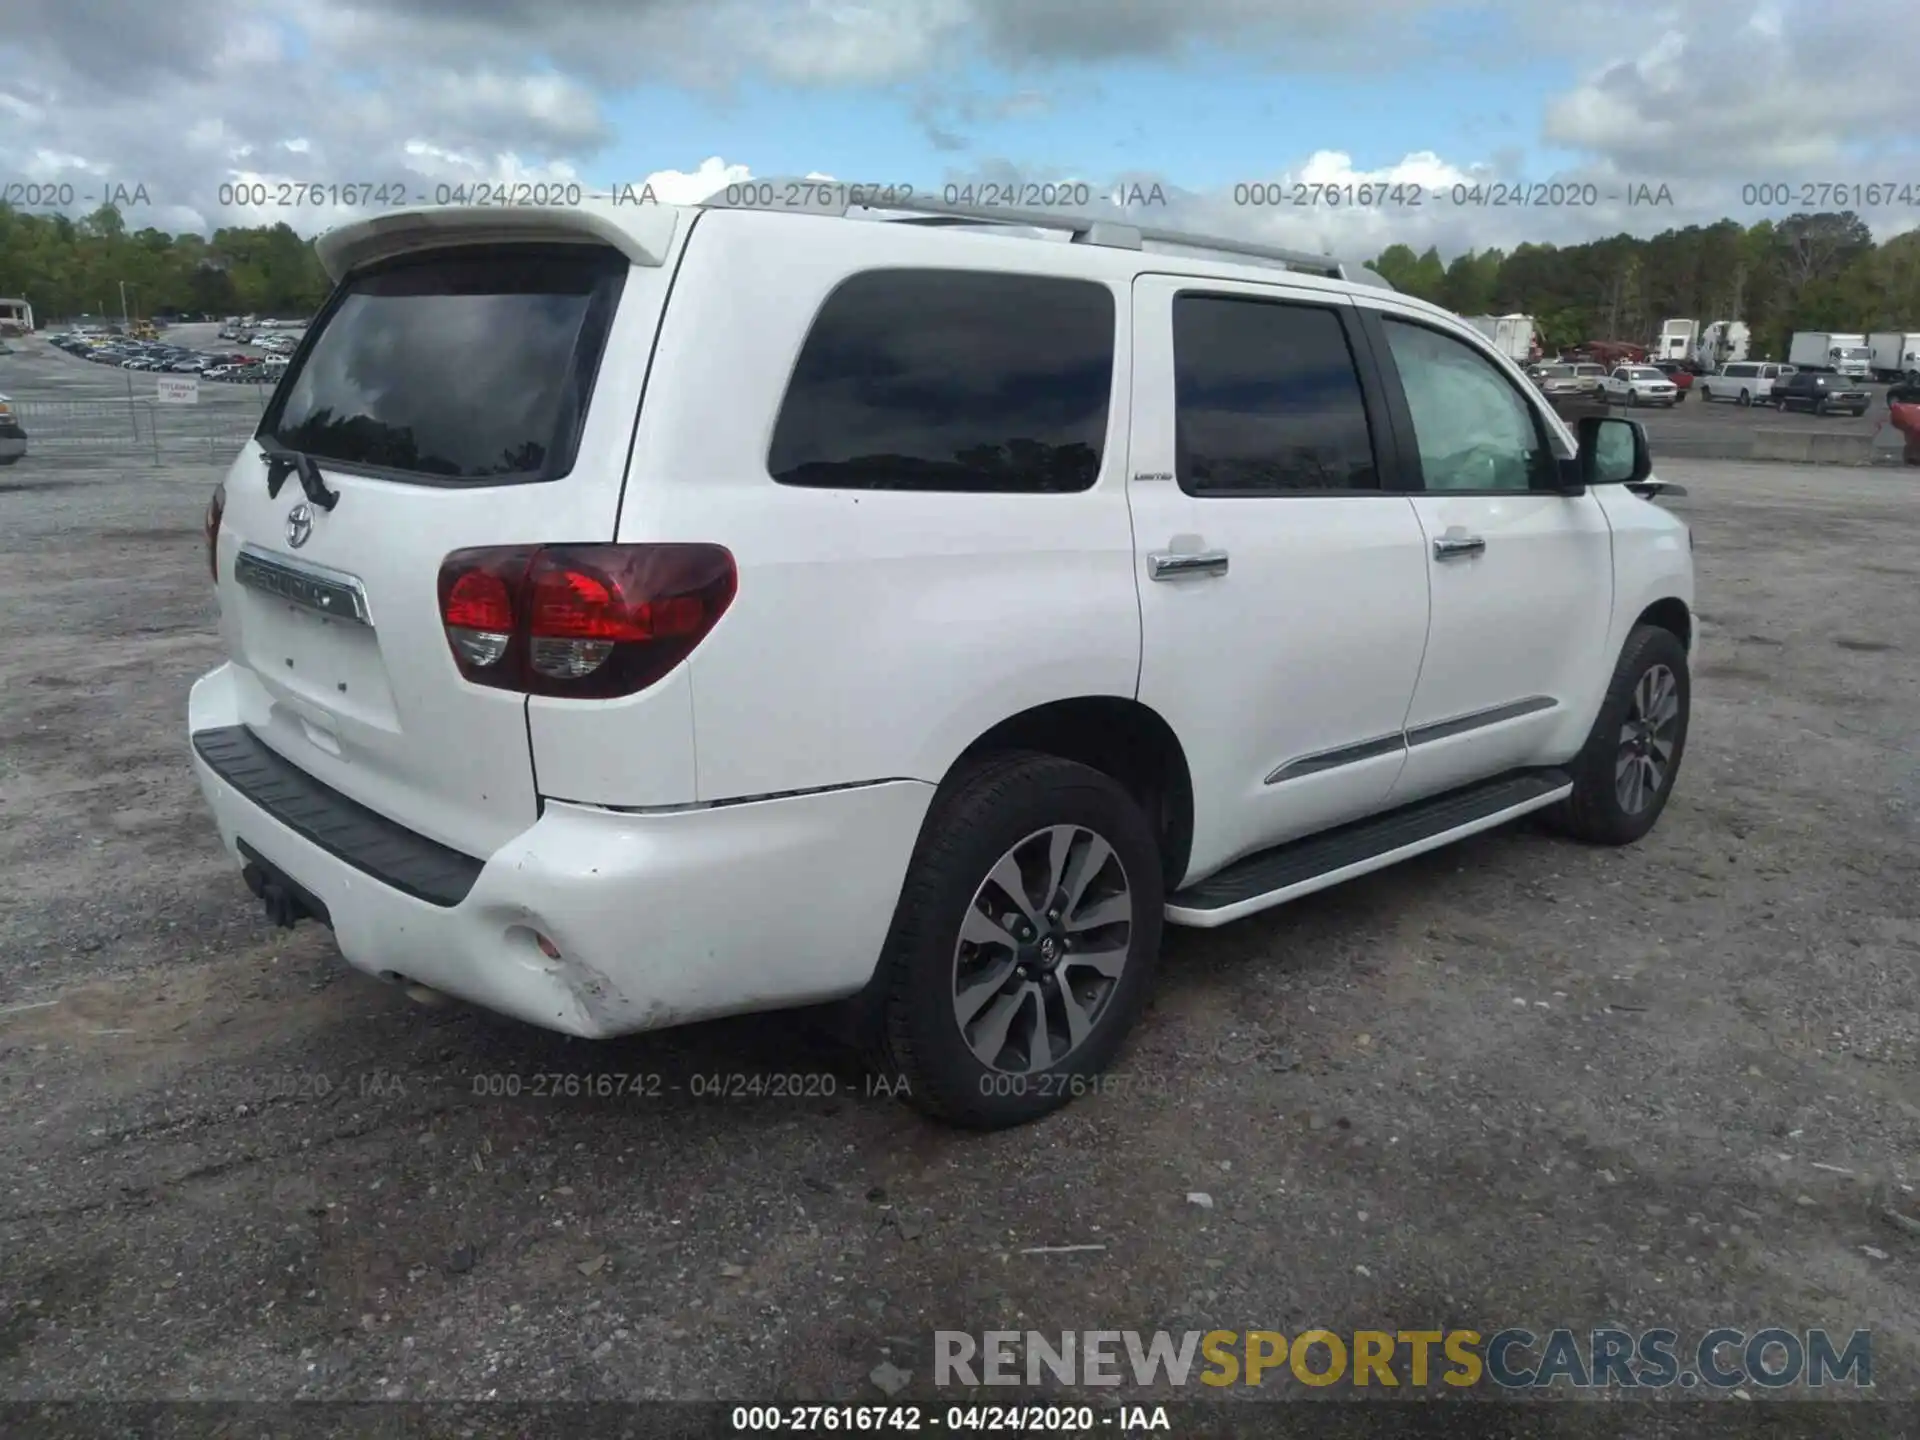 4 Photograph of a damaged car 5TDJY5G12KS171373 TOYOTA SEQUOIA 2019